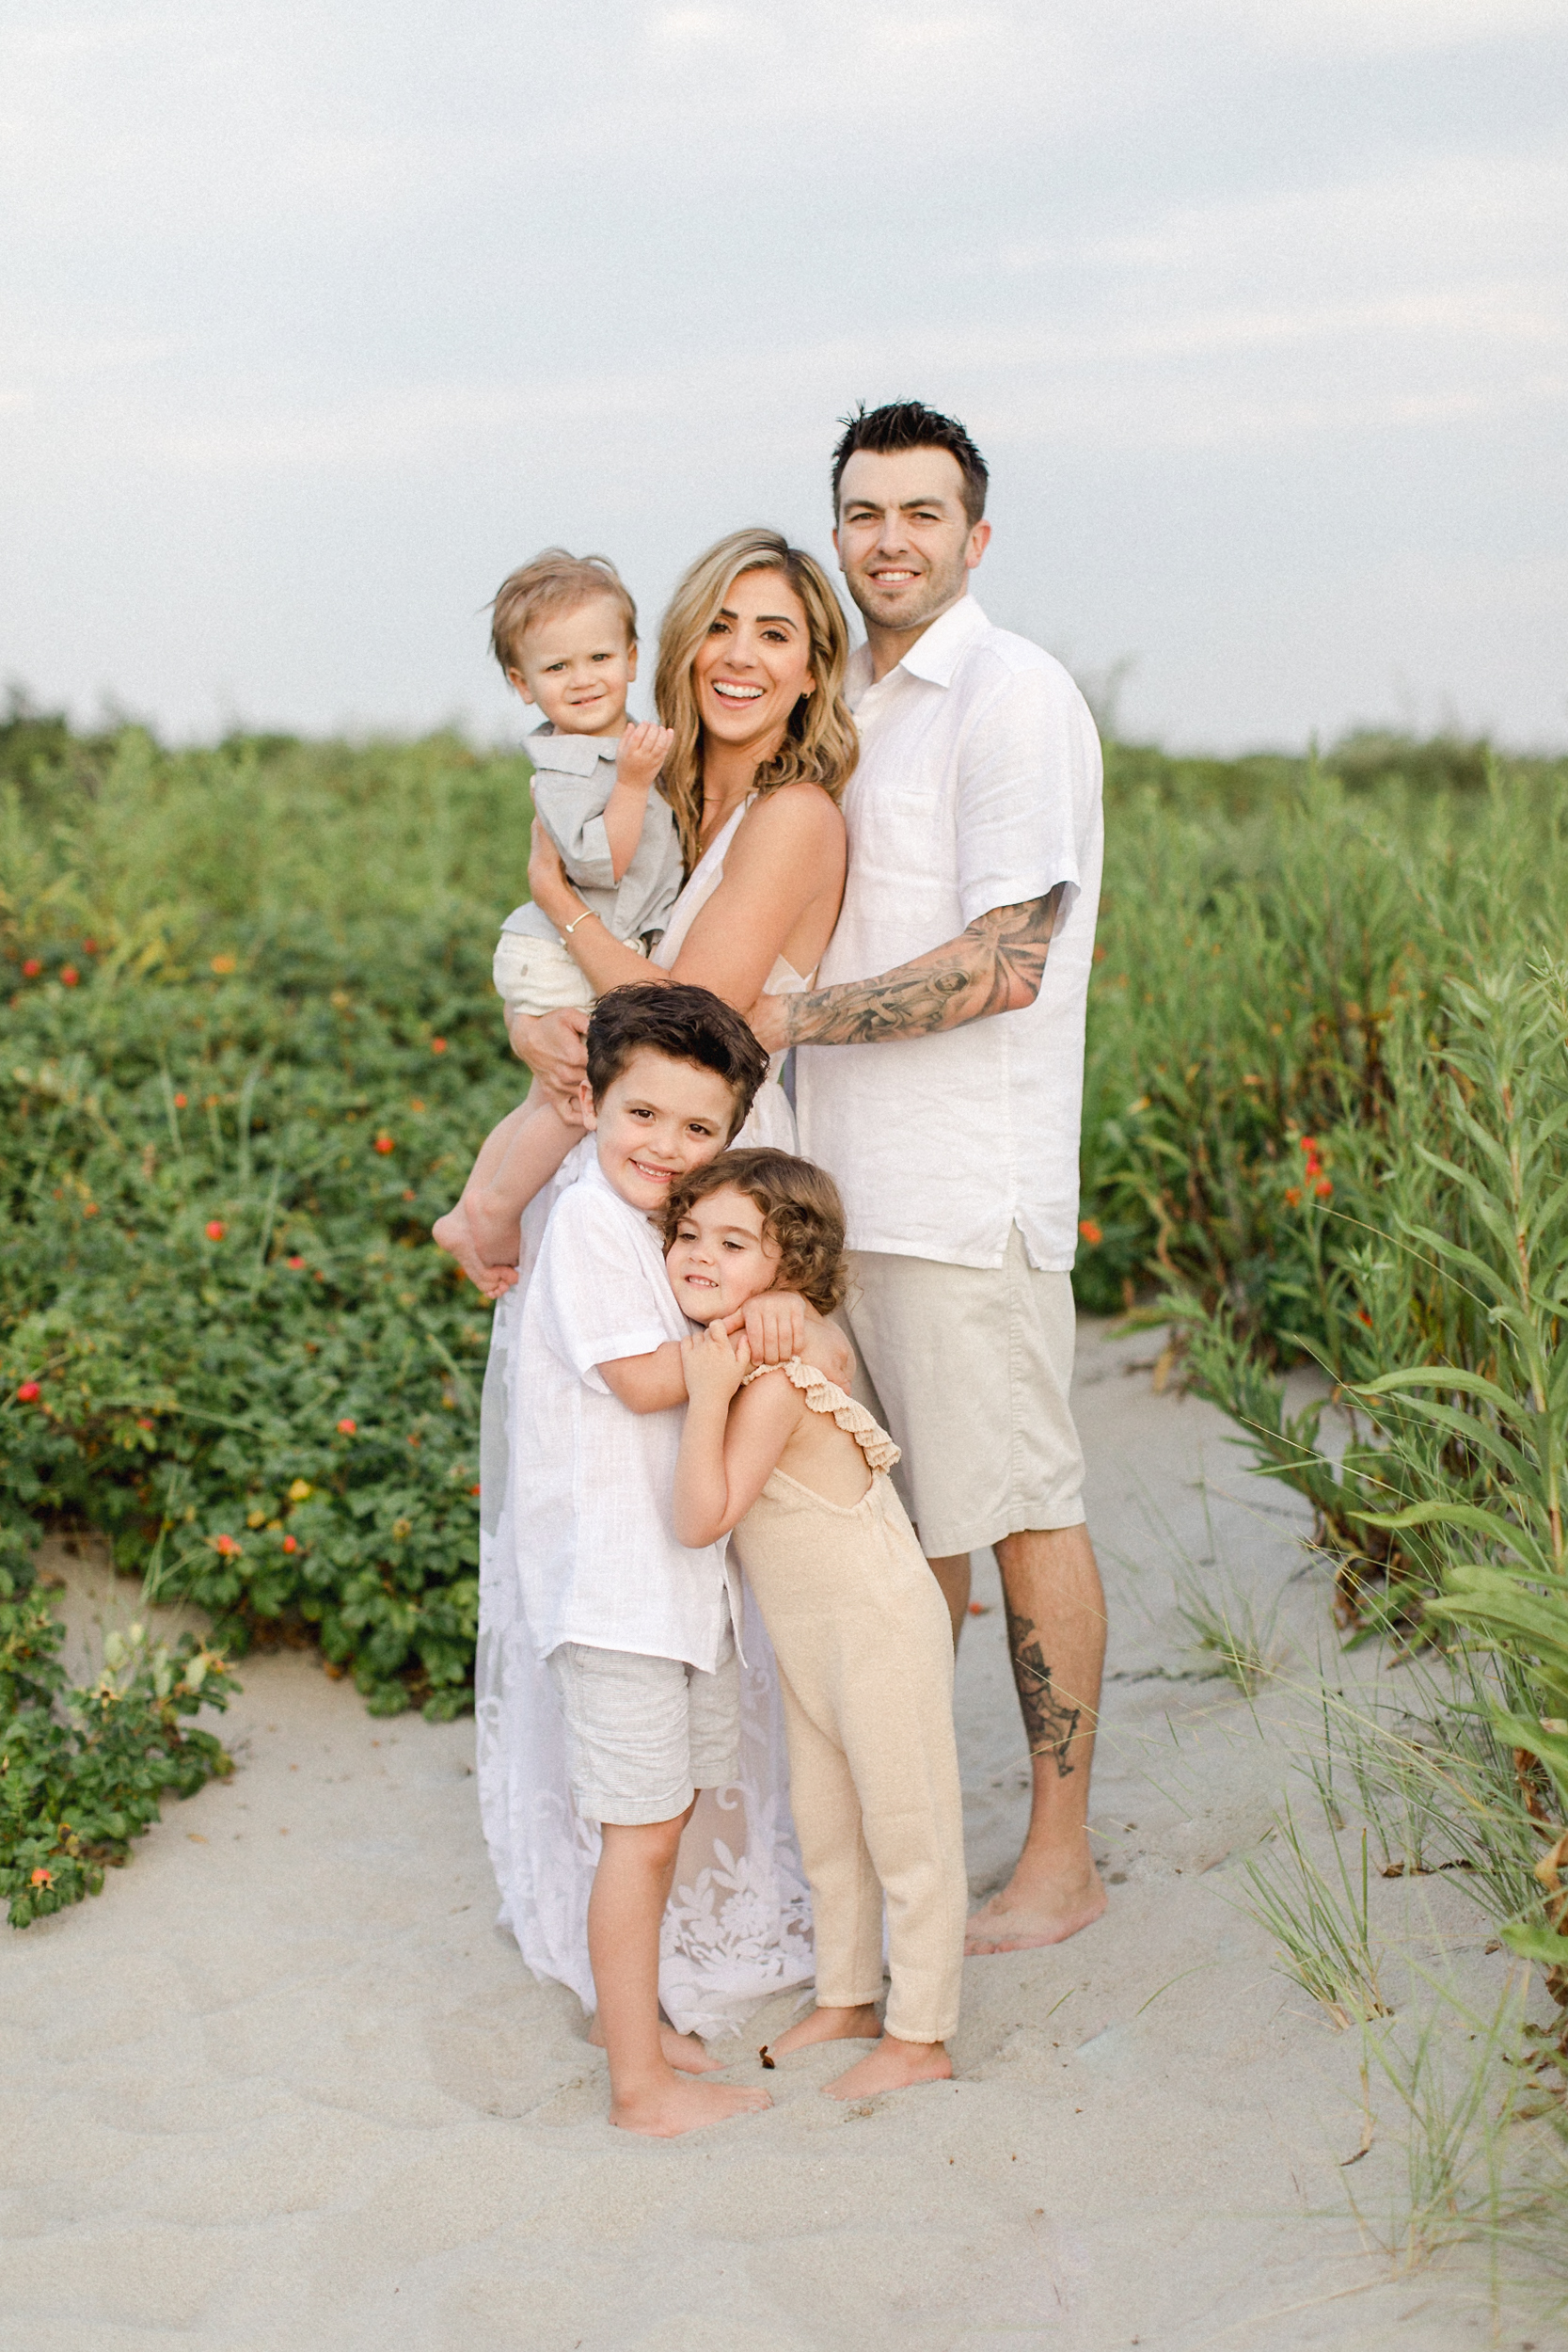 Connecticut life and style blogger Lauren McBride shares Tips for Taking Family Holiday Photos, including holiday card options from Minted.